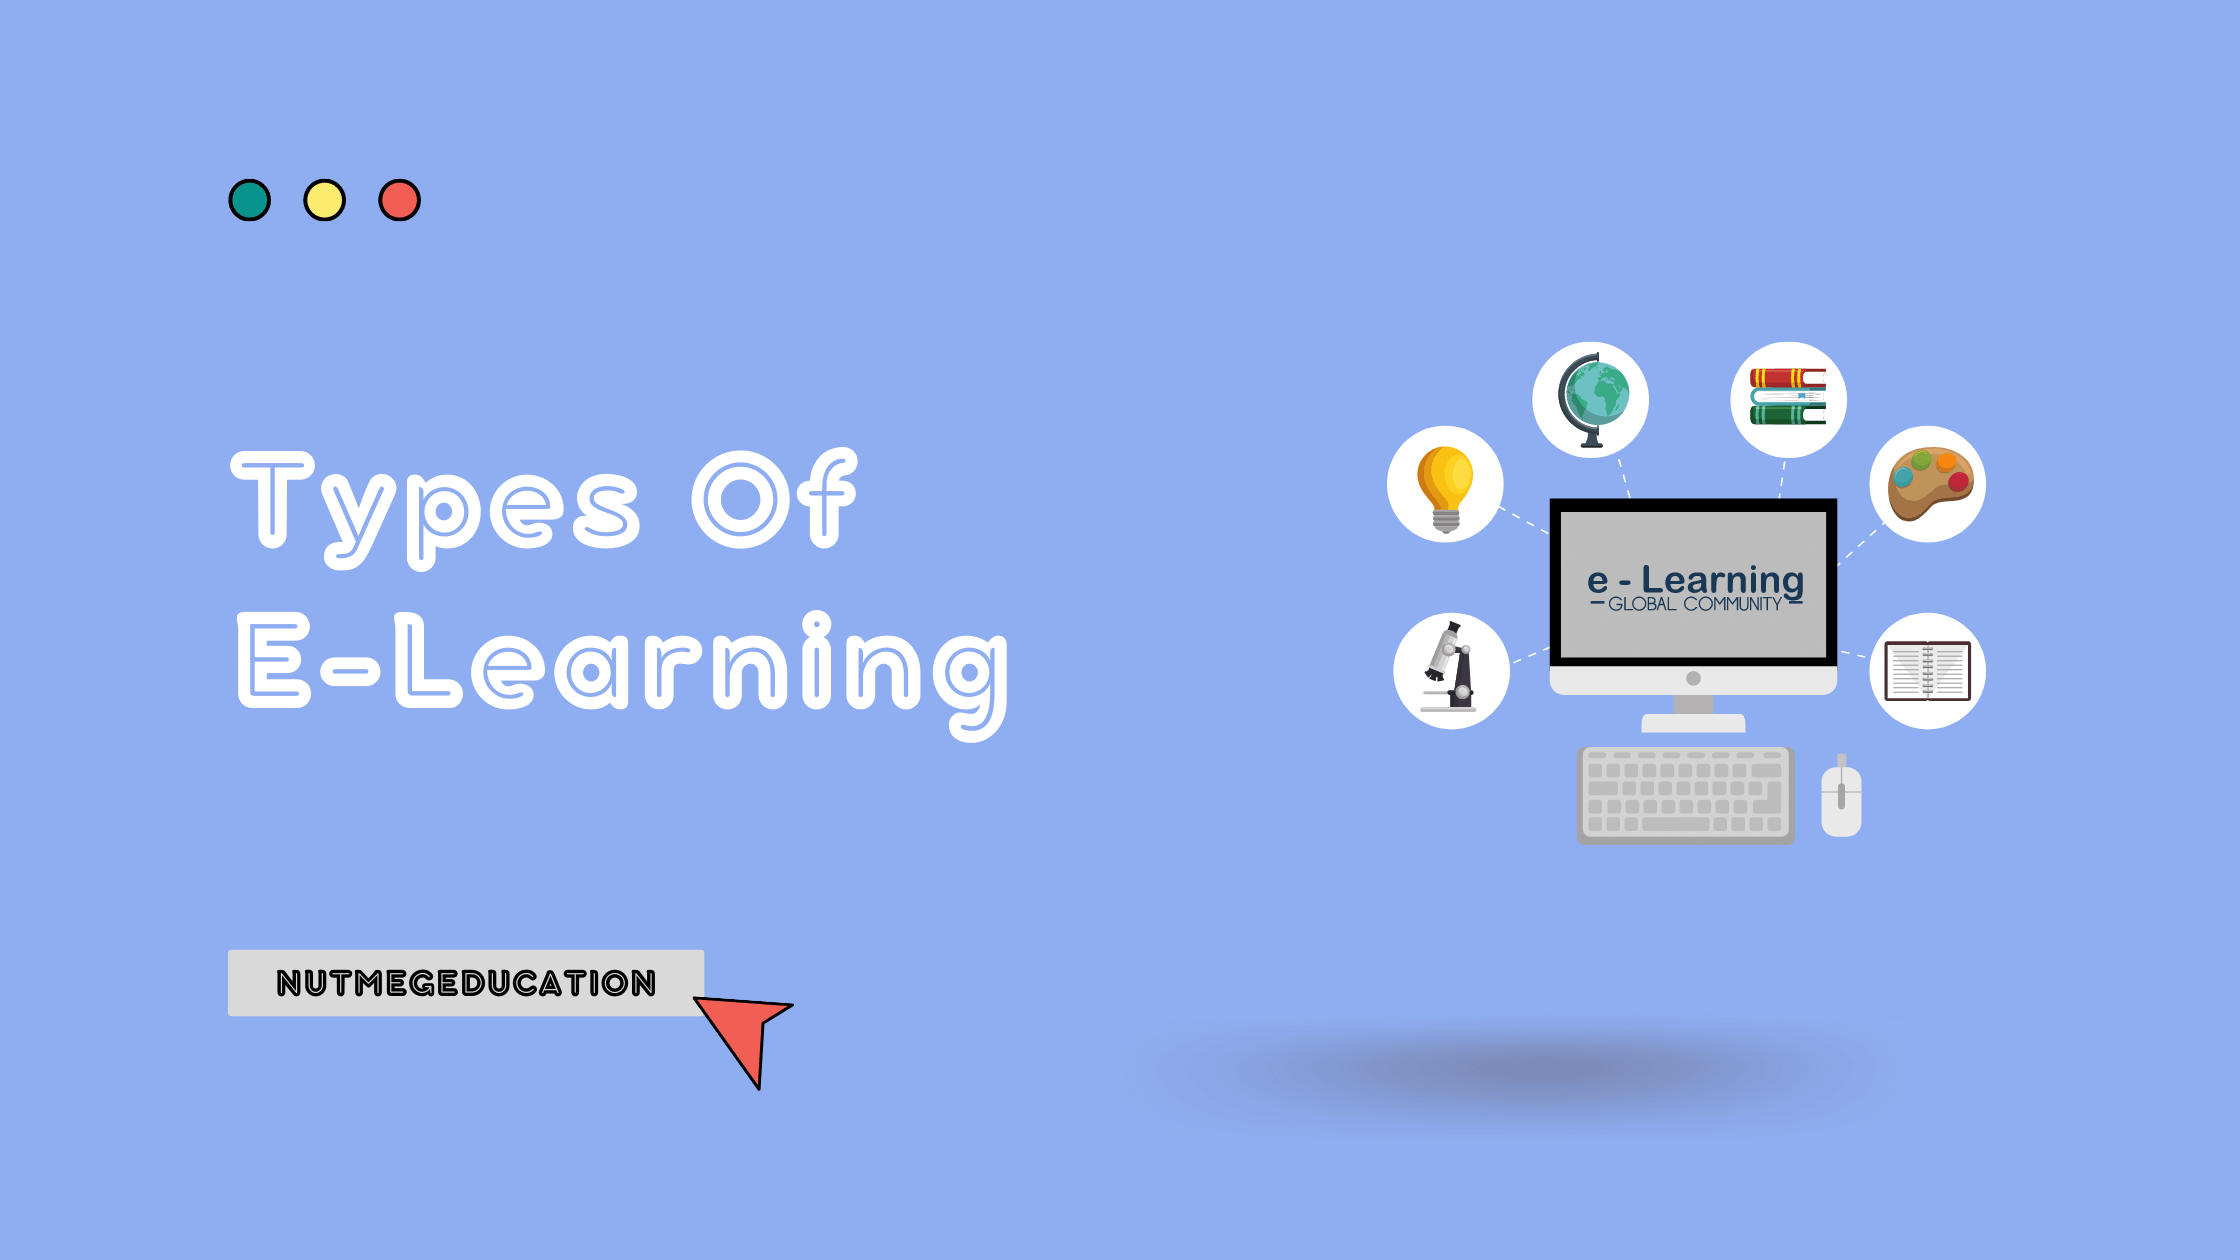 Types Of E-Learning - NutMegEducation